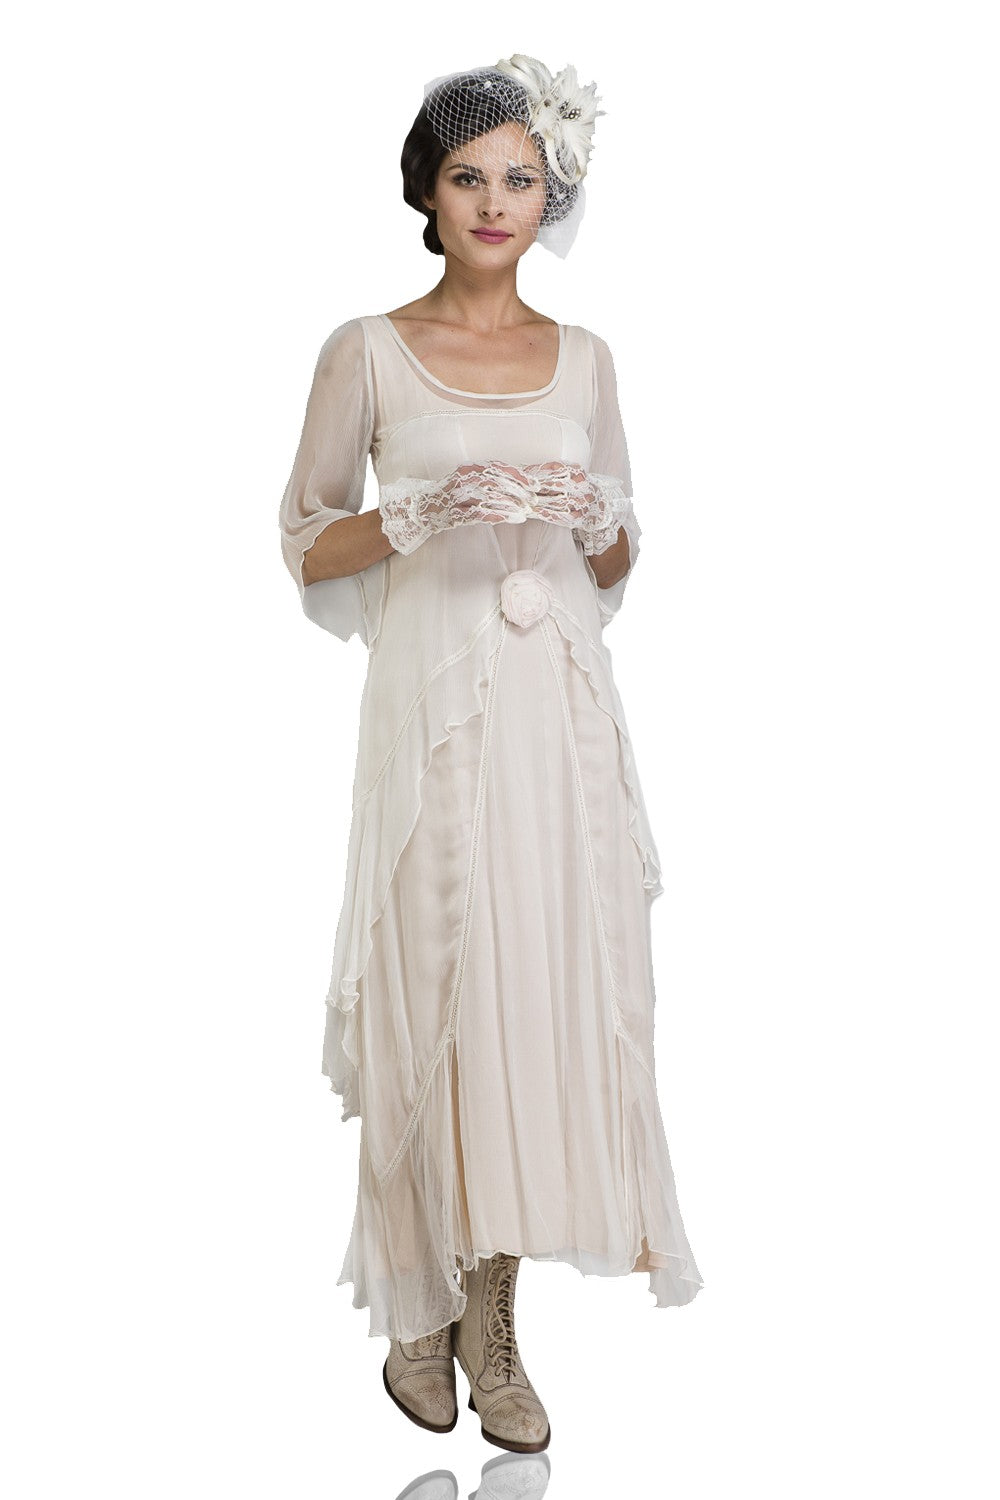 Buy Boardwalk Empire Inspired Dresses Great Gatsby Party Dress in Ivory by Nataya $249.00 AT vintagedancer.com